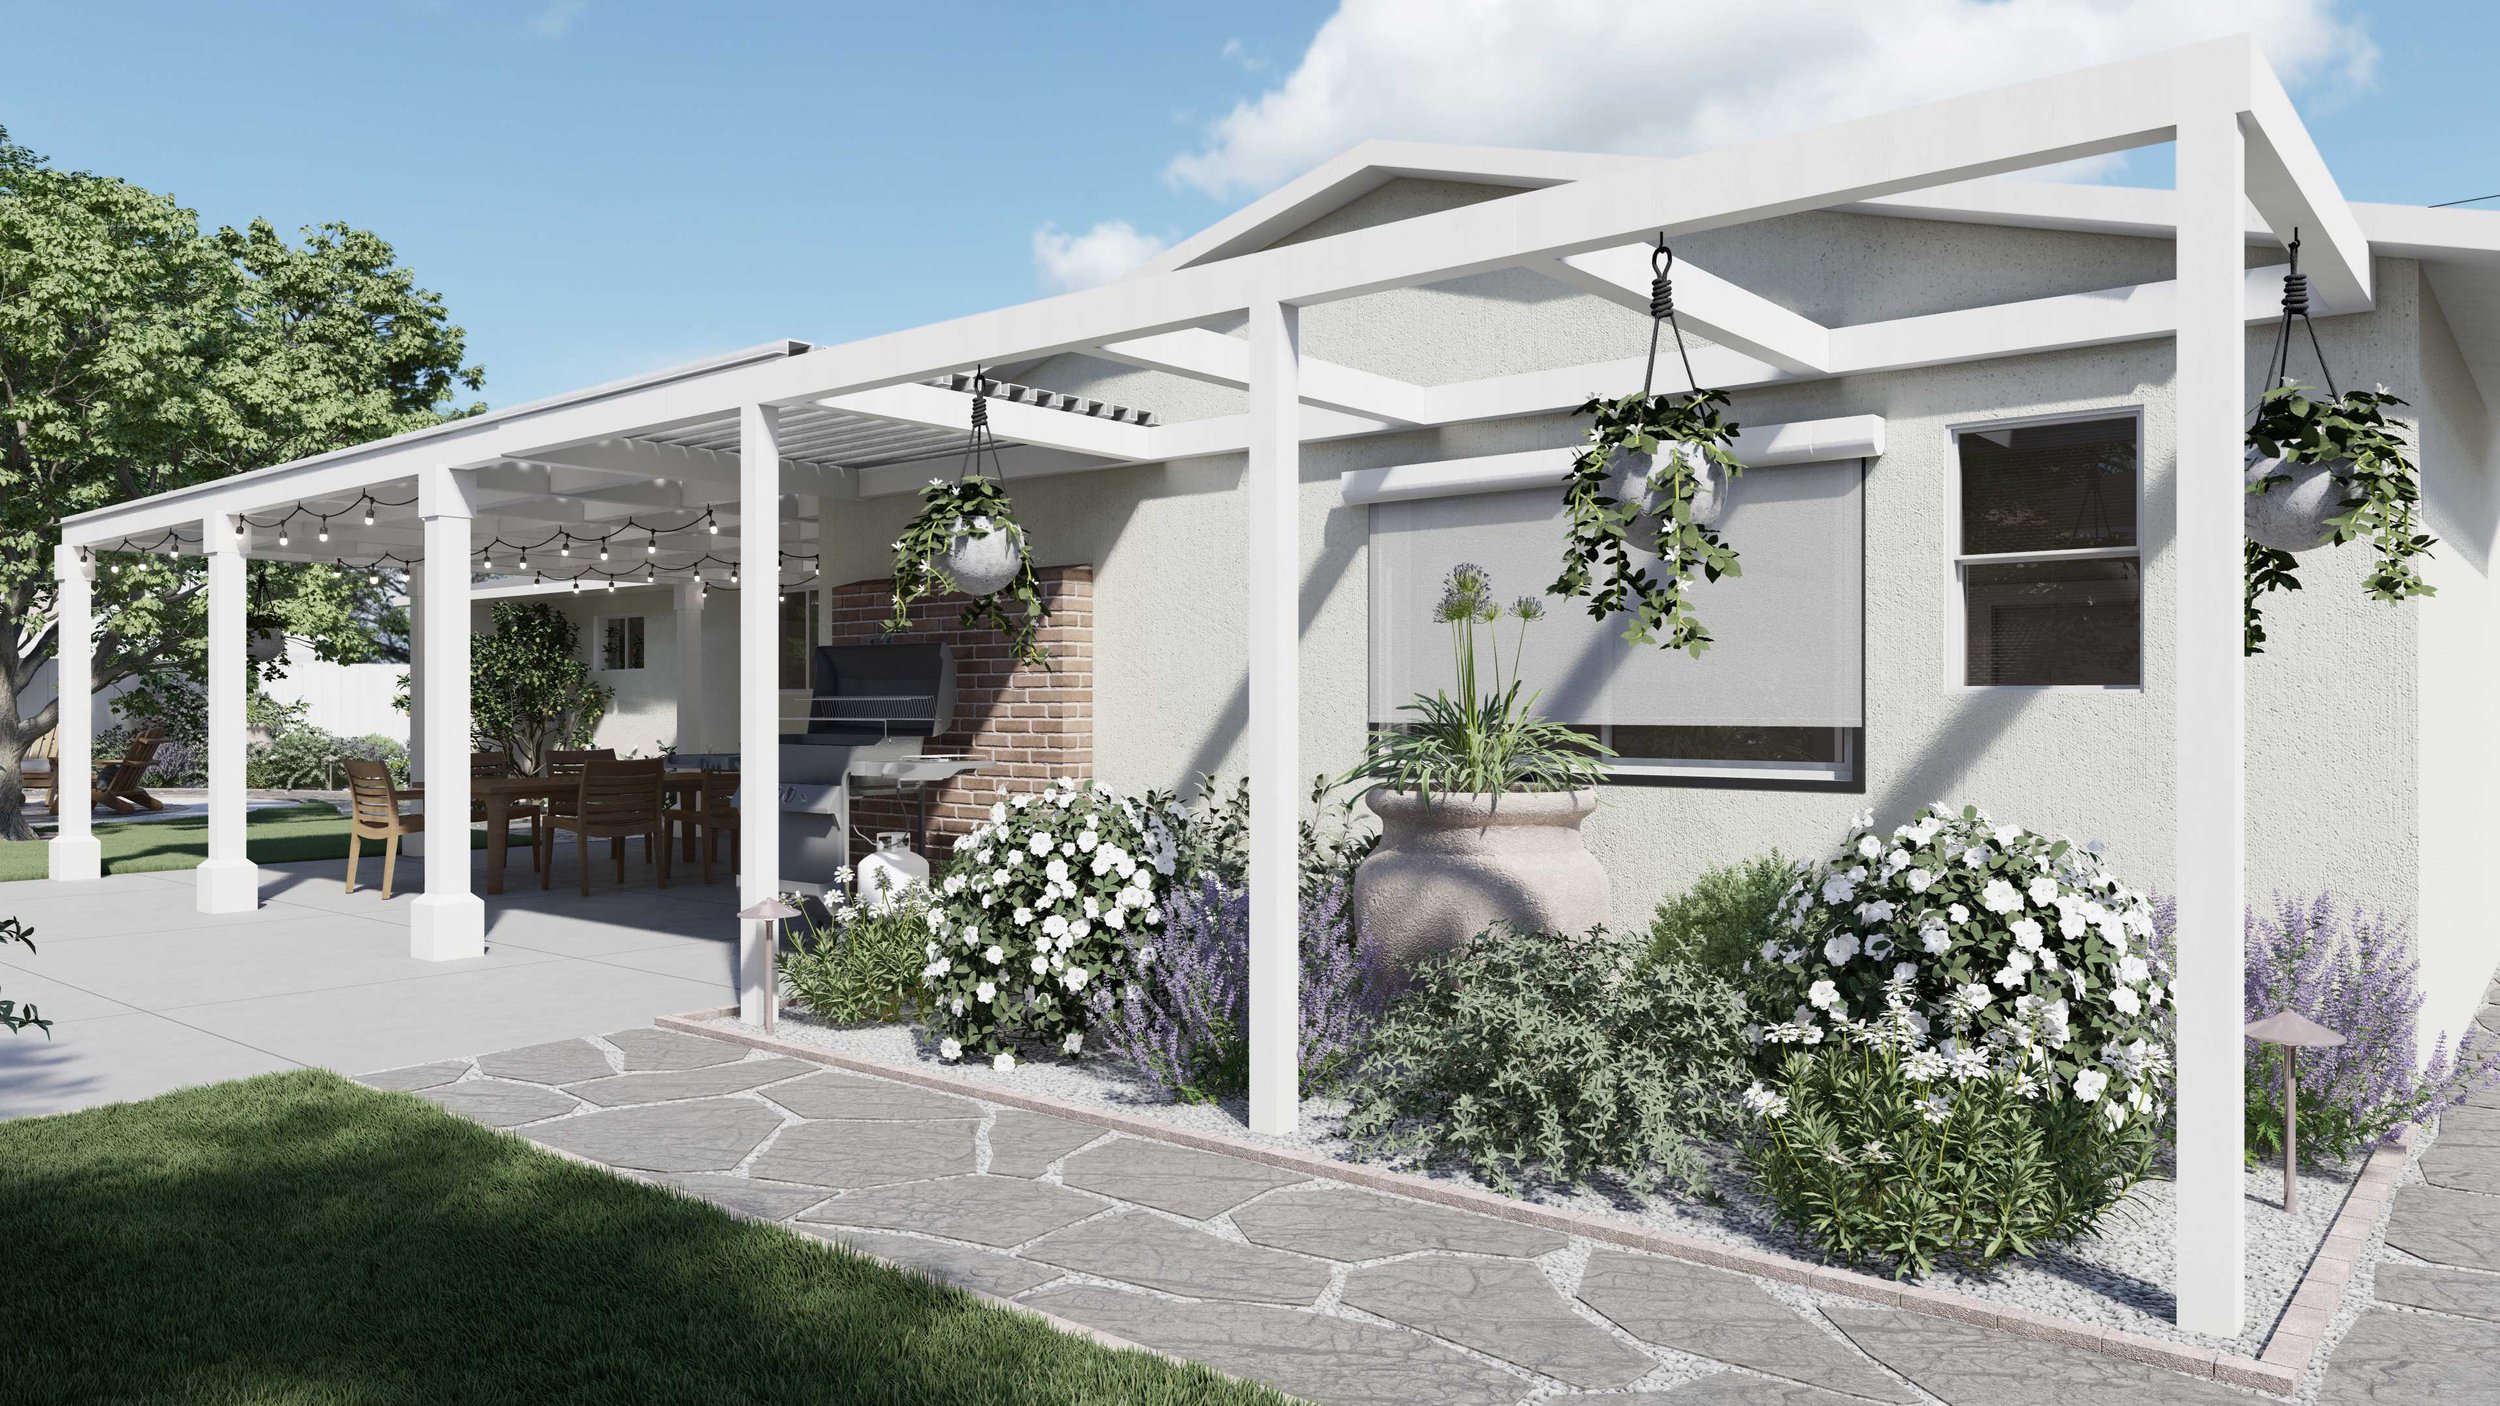 Airy pergola with densely planted outdoor kitchen and dining area along the house’s rear wall